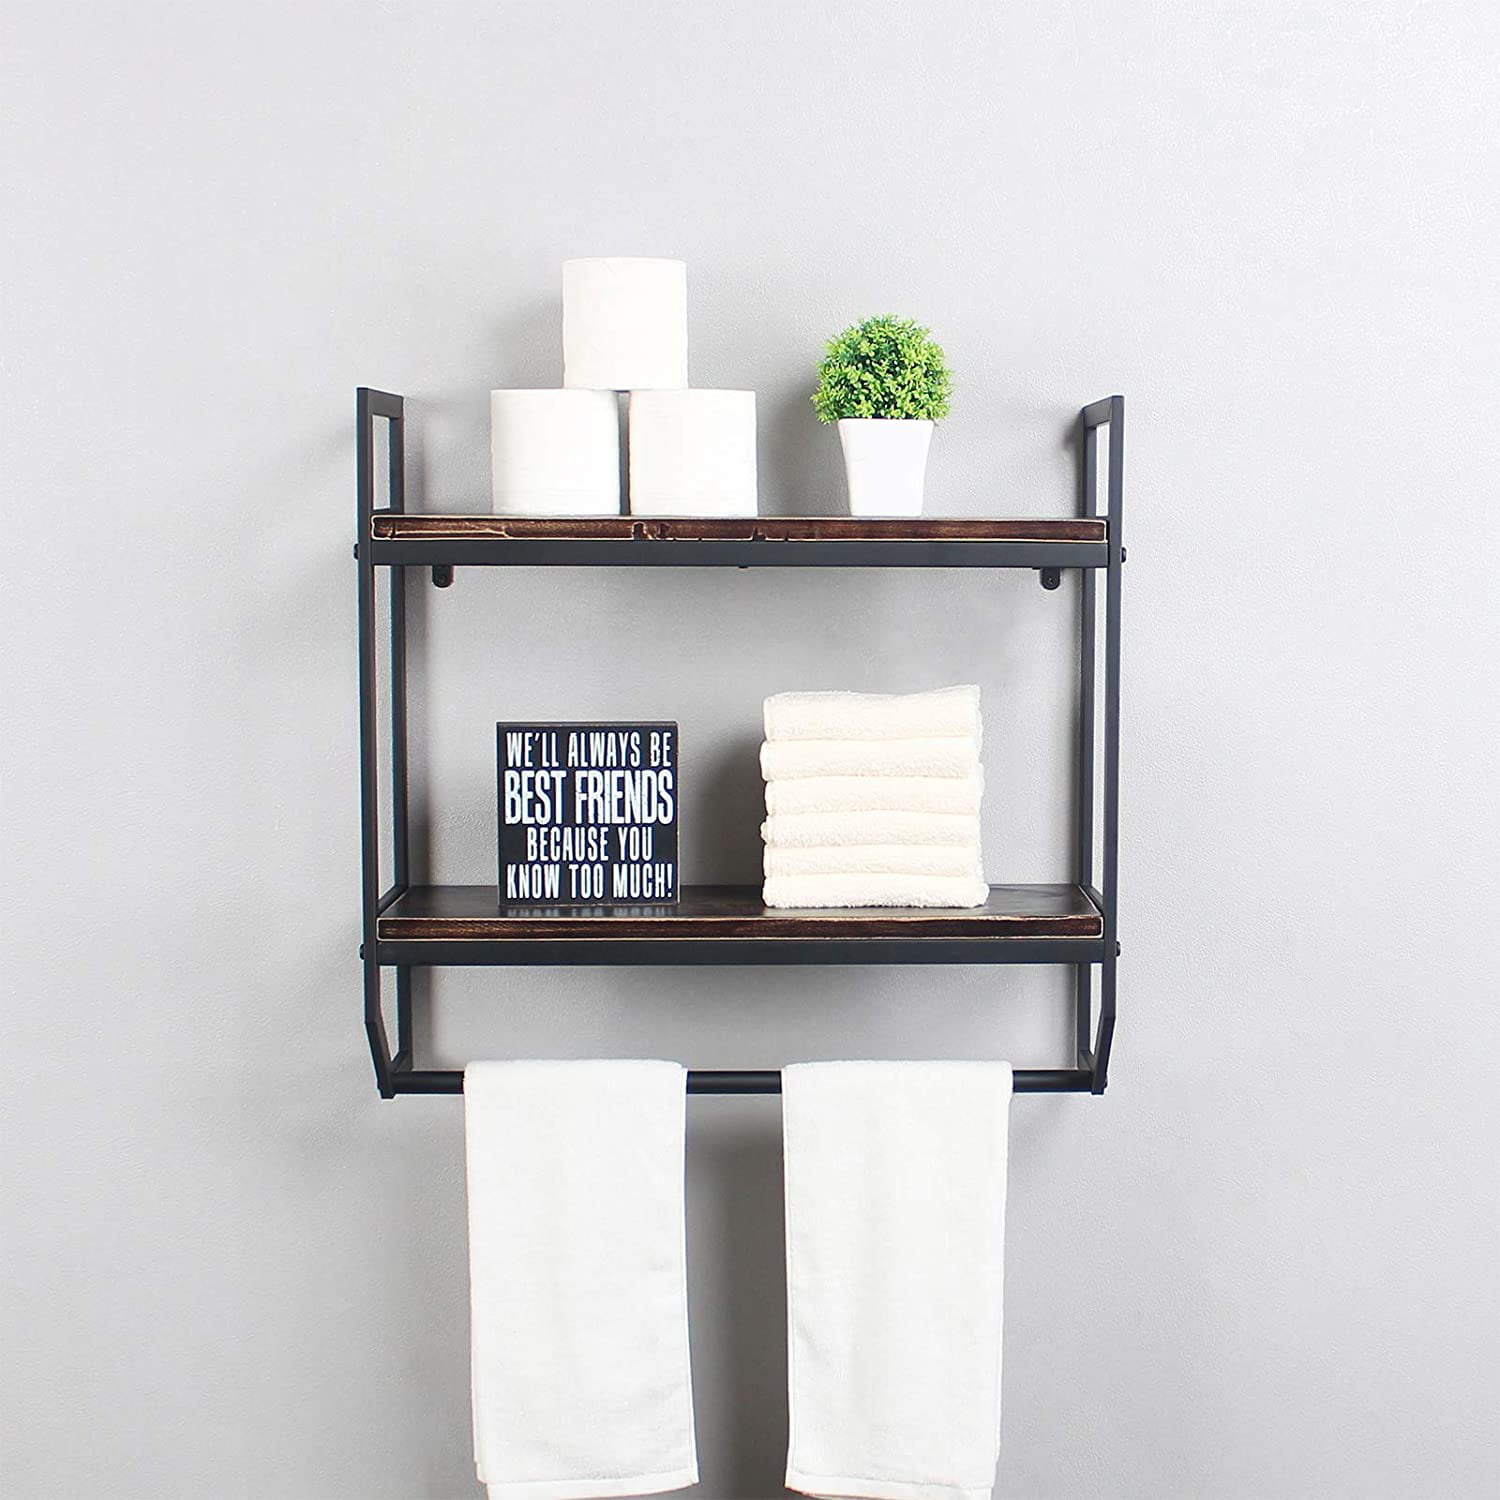  OYEAL Bathroom Shelves Freestanding Bathroom Towel Storage 4  Tier Wire Shelving Unit with Guard Bathroom Shelf Organizer Standing for  Pantry Kitchen Laundry Room Organization, Black : Home & Kitchen